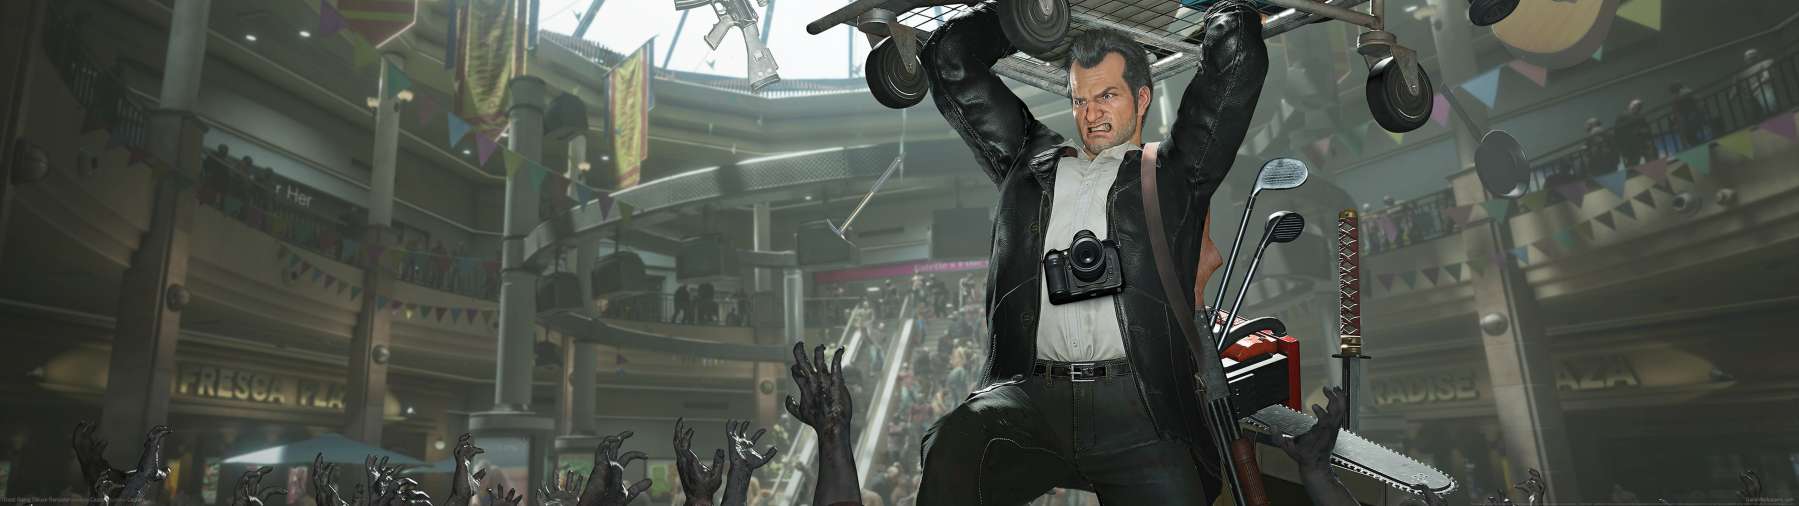 Dead Rising Deluxe Remaster superwide fond d'cran 01